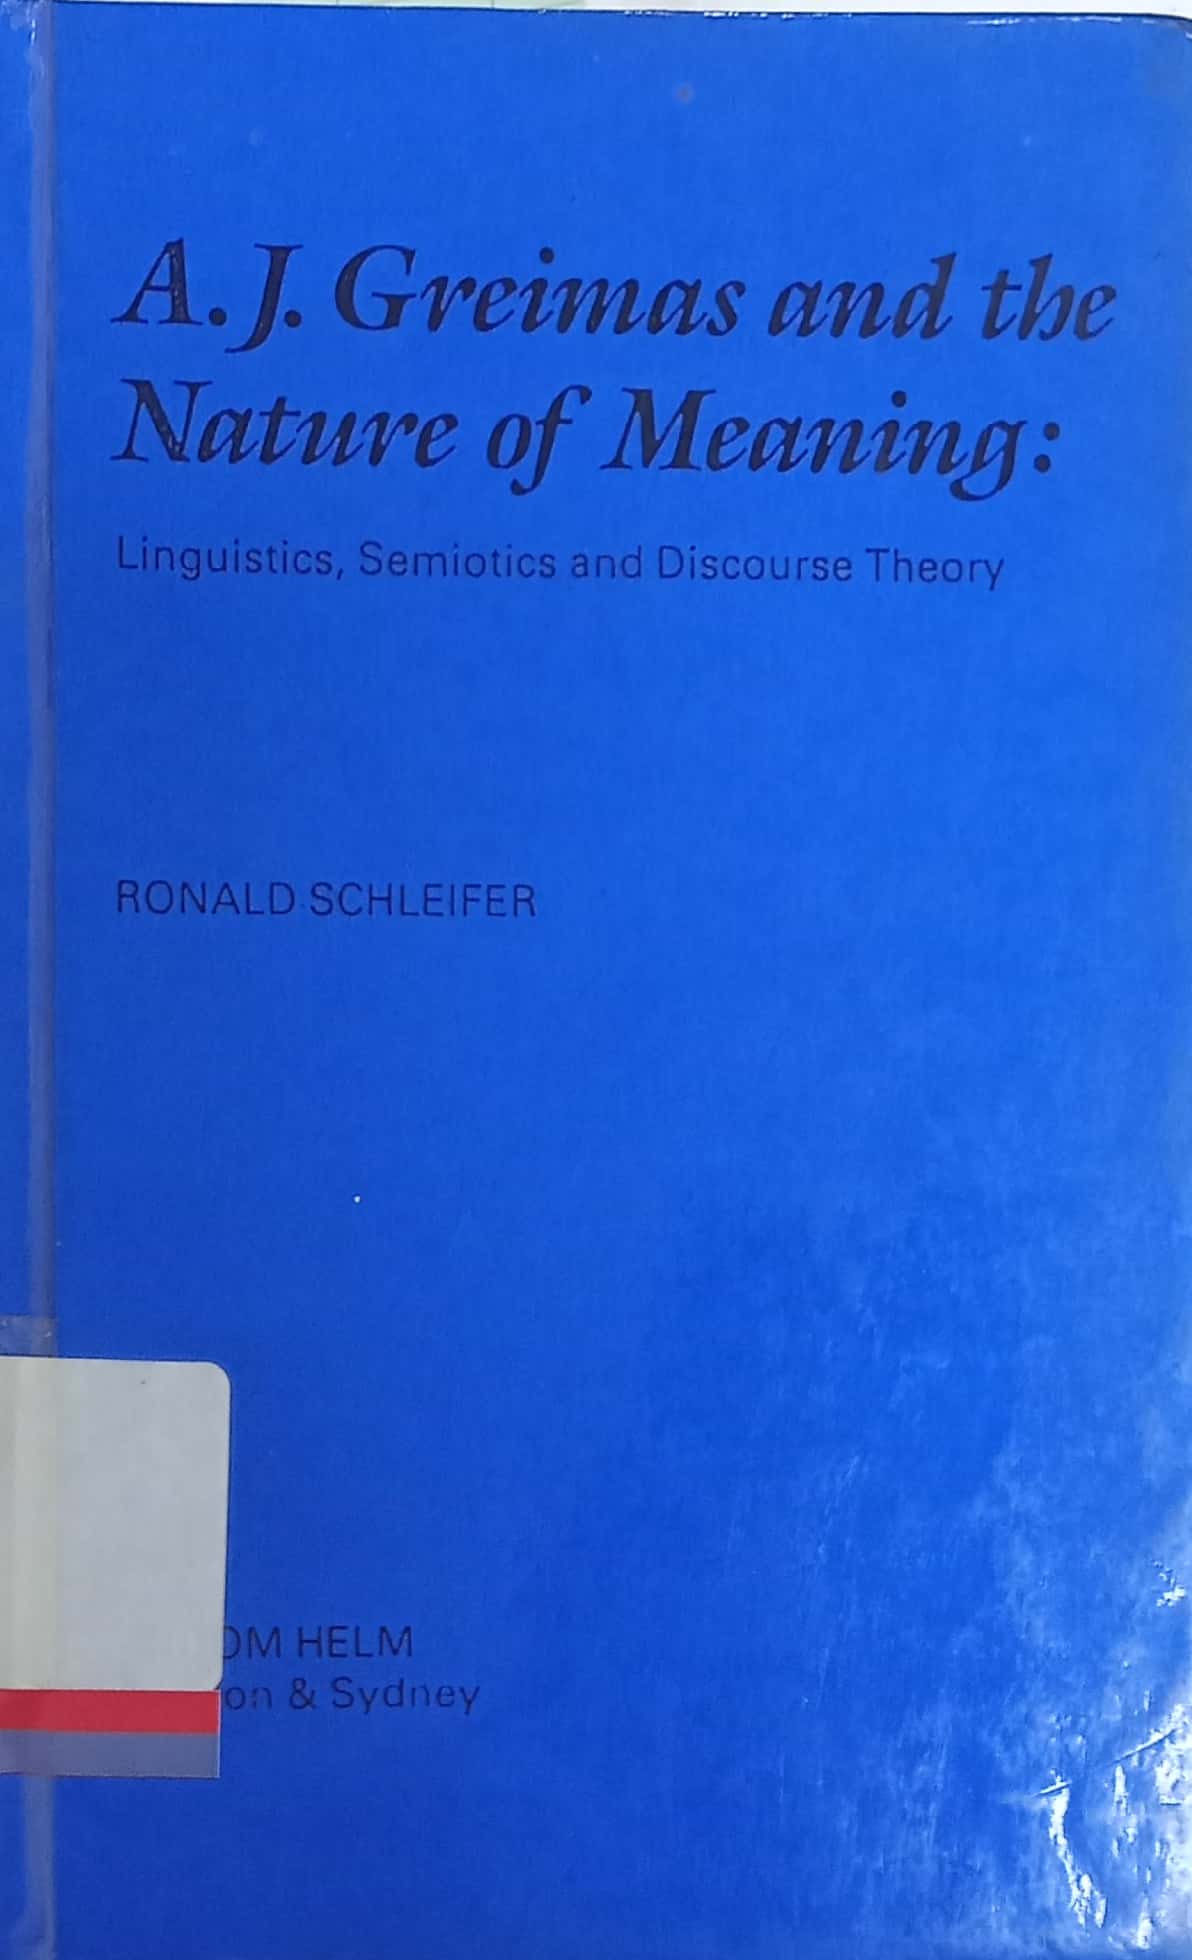 A.J. greimas and the nature of meaning : Linguistics, semiotics and discourse theory